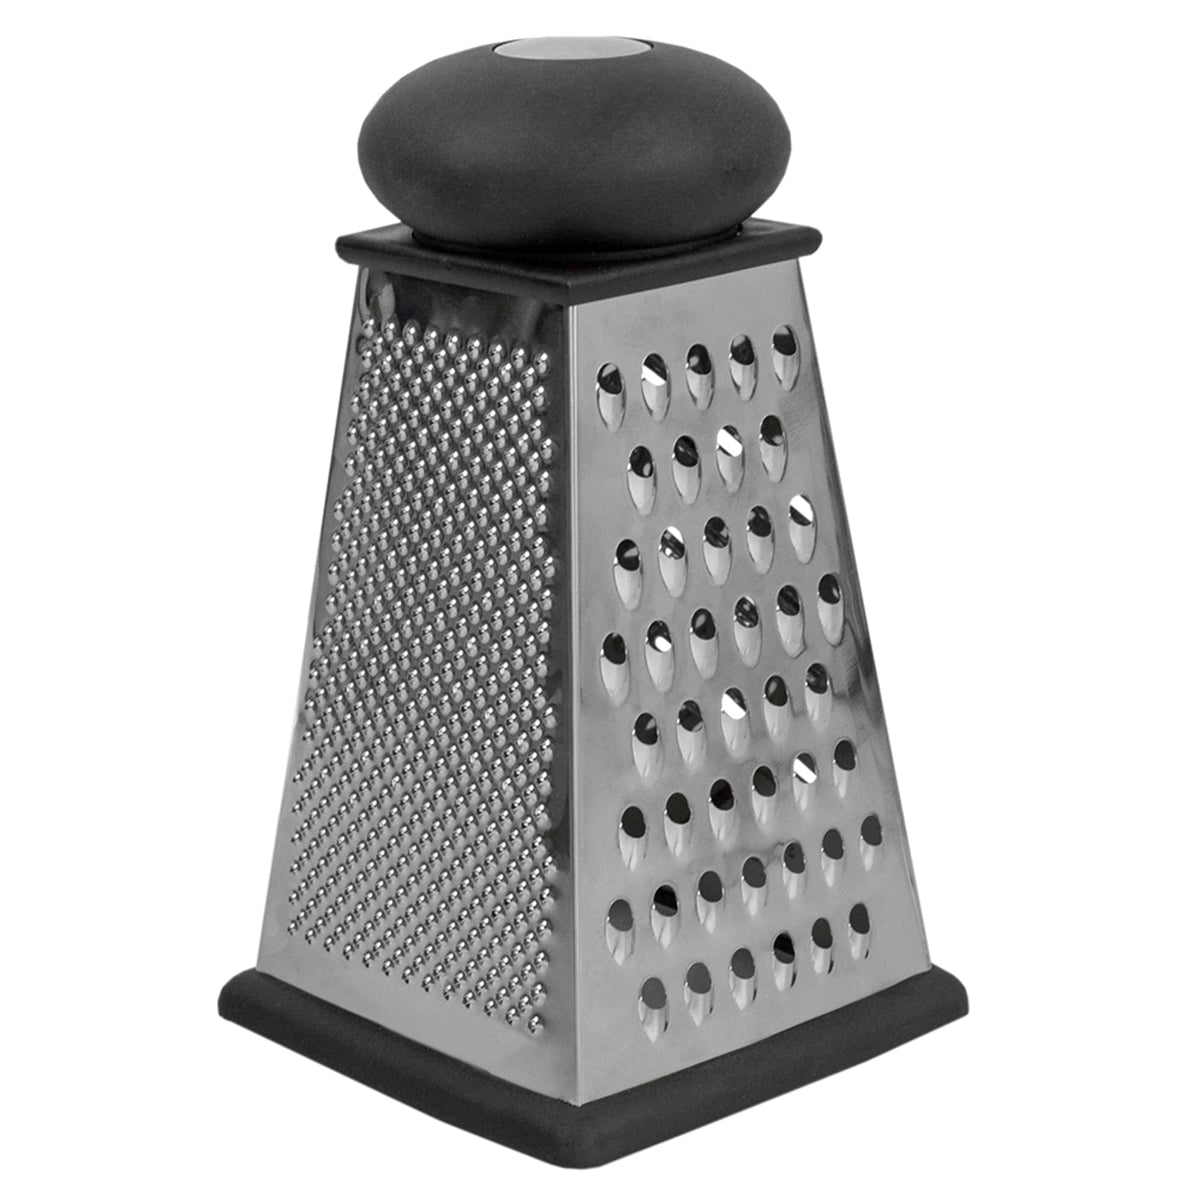 Home Basics Black Mini Grater with Rubber Handle - Bed Bath & Beyond -  22580145